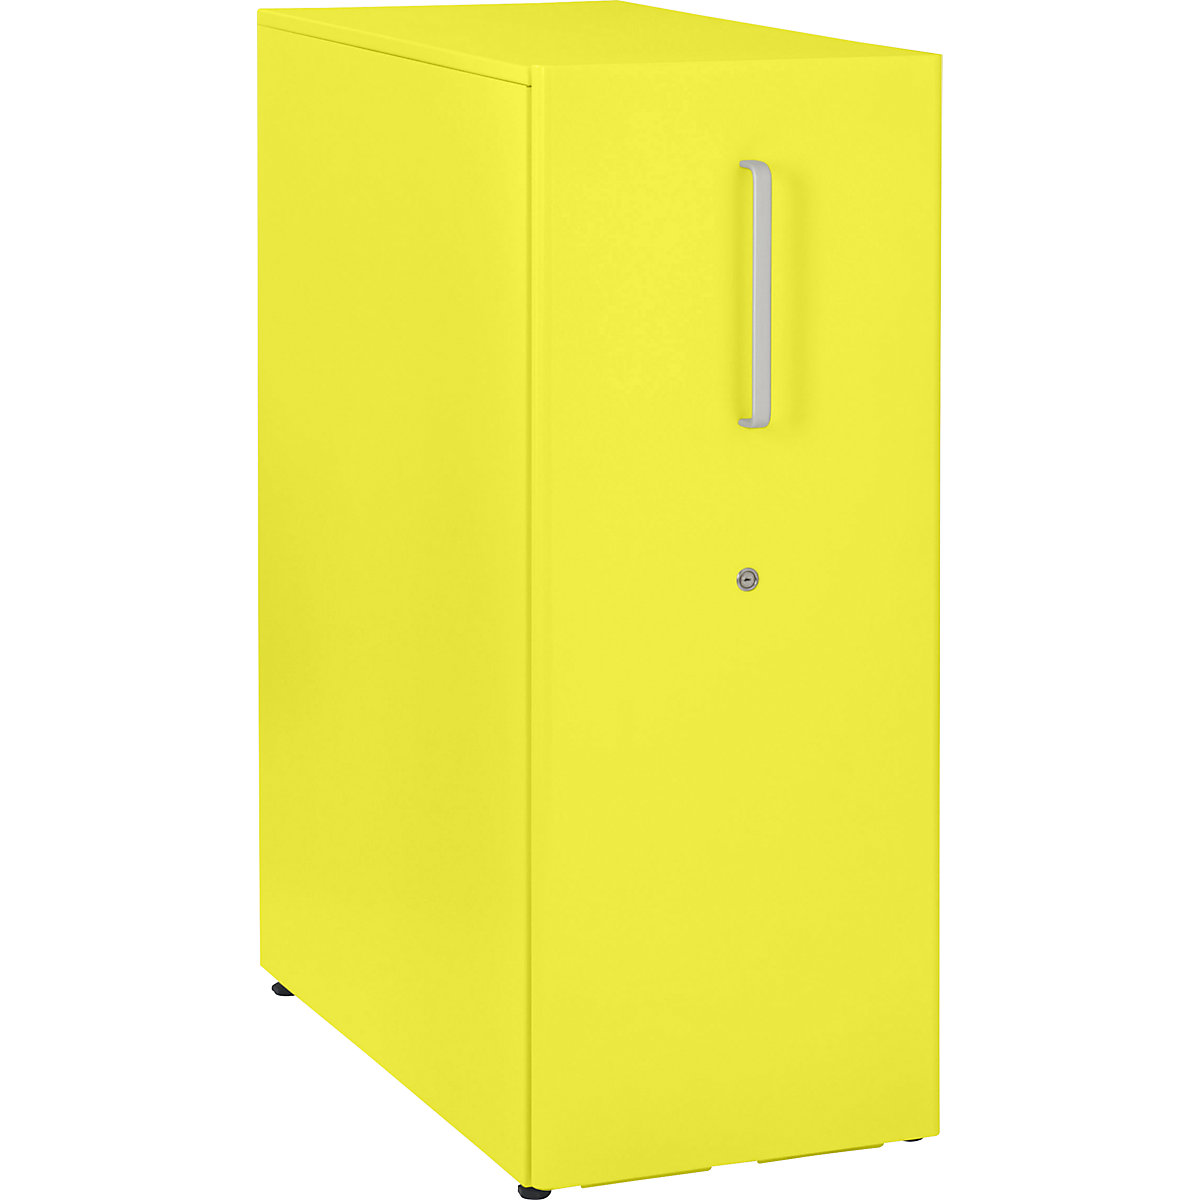 Tower™ 3 add-on furniture, with worktop – BISLEY, for the left side, 3 shelves, zinc yellow-25